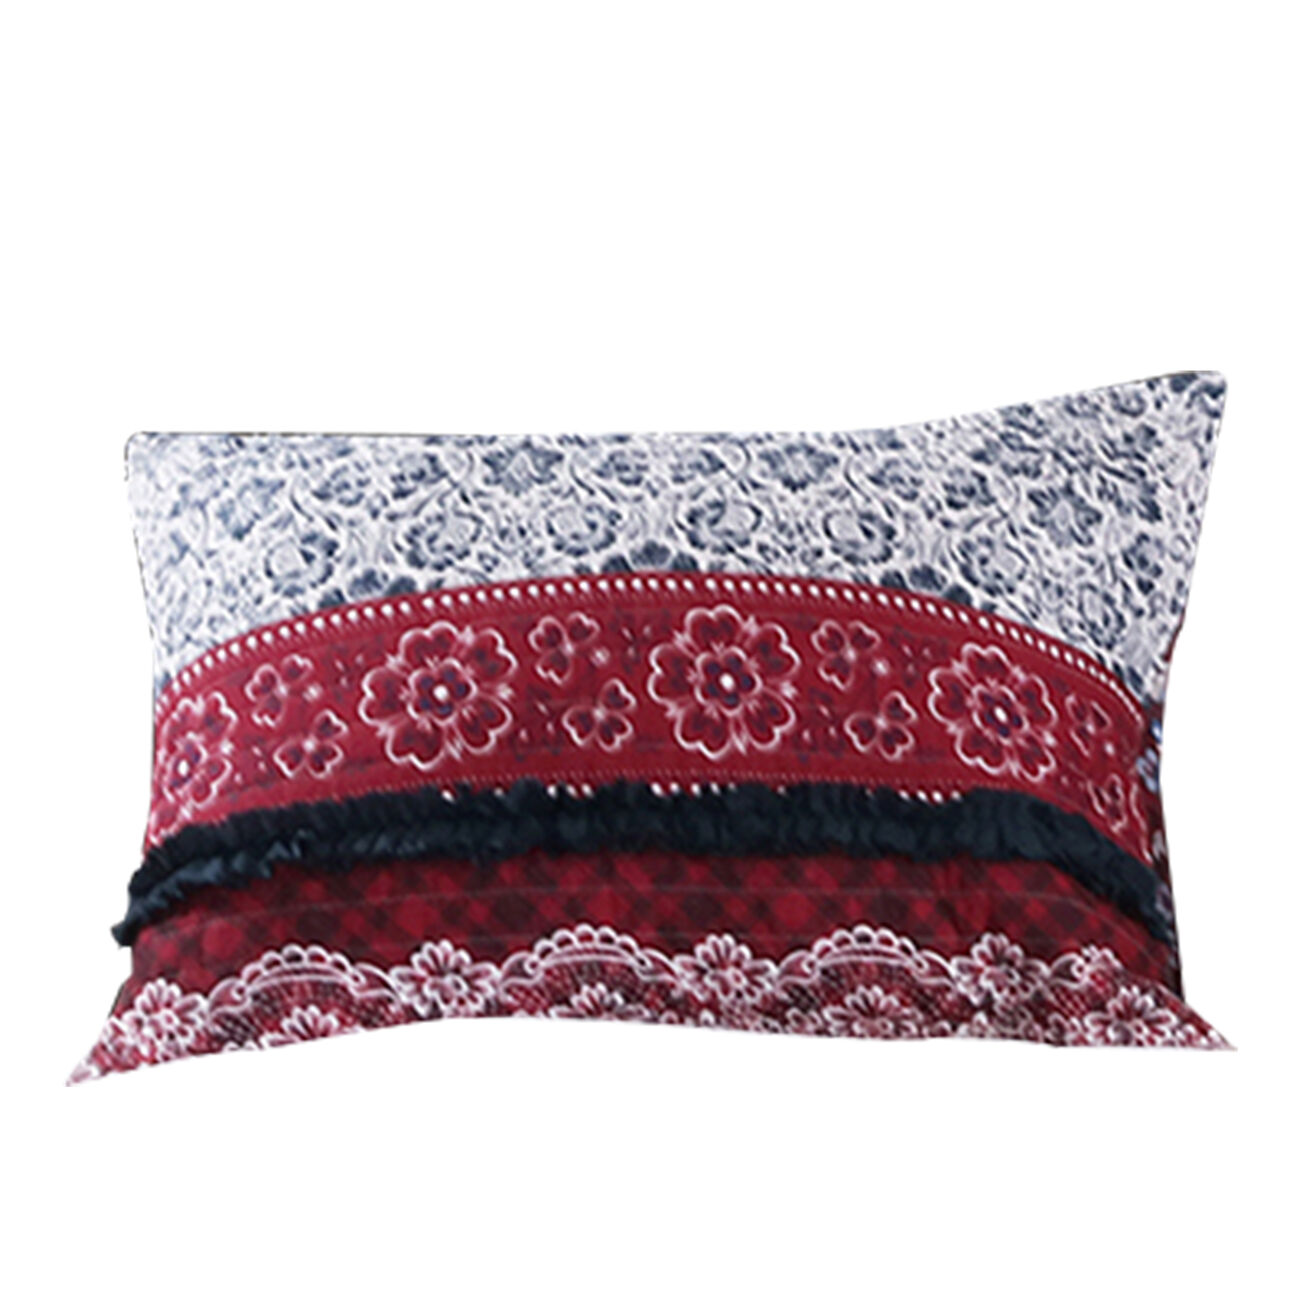 36 x 20 Fabric King Pillow Sham with Ruffled Stitching, Blue and Red - BM223373